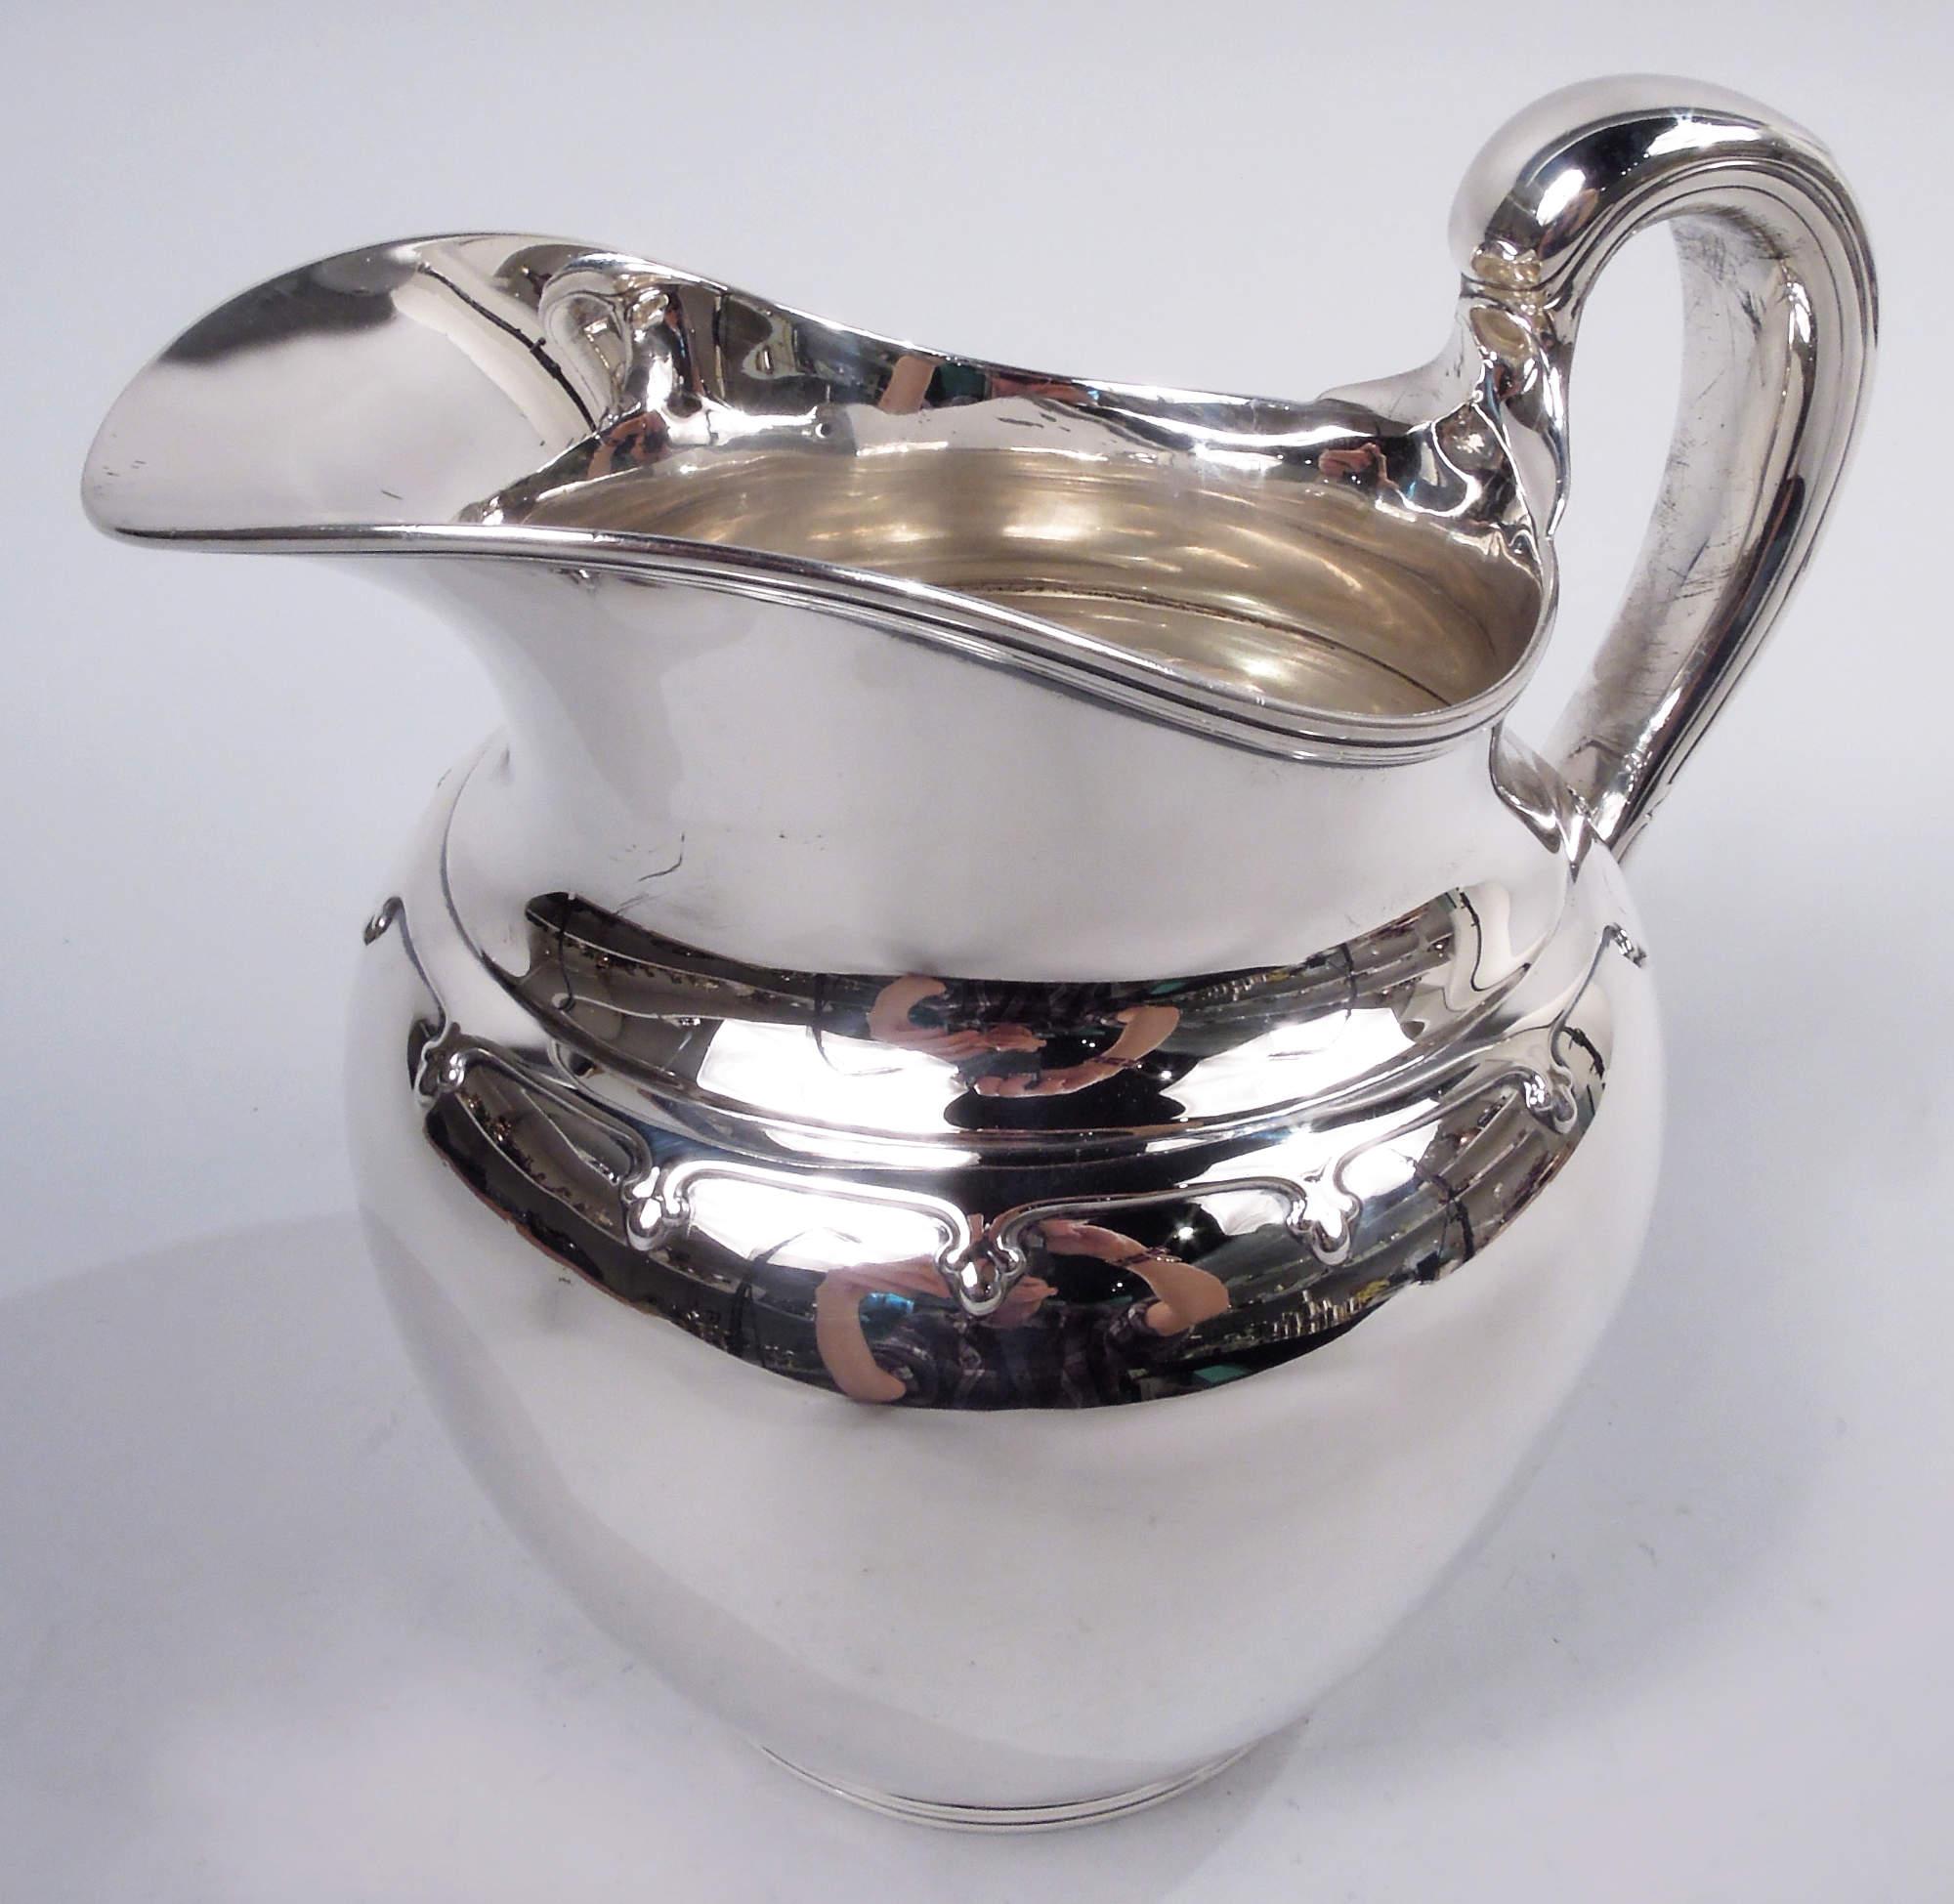 Saint Dunstan sterling silver water pitcher. Made by Tiffany & Co. in New York, ca 1910. Globular with high-looping and capped handle, helmet mouth, and reeded foot ring. Girdle with pendant fleurs de lys applied to shoulder. Fully marked including